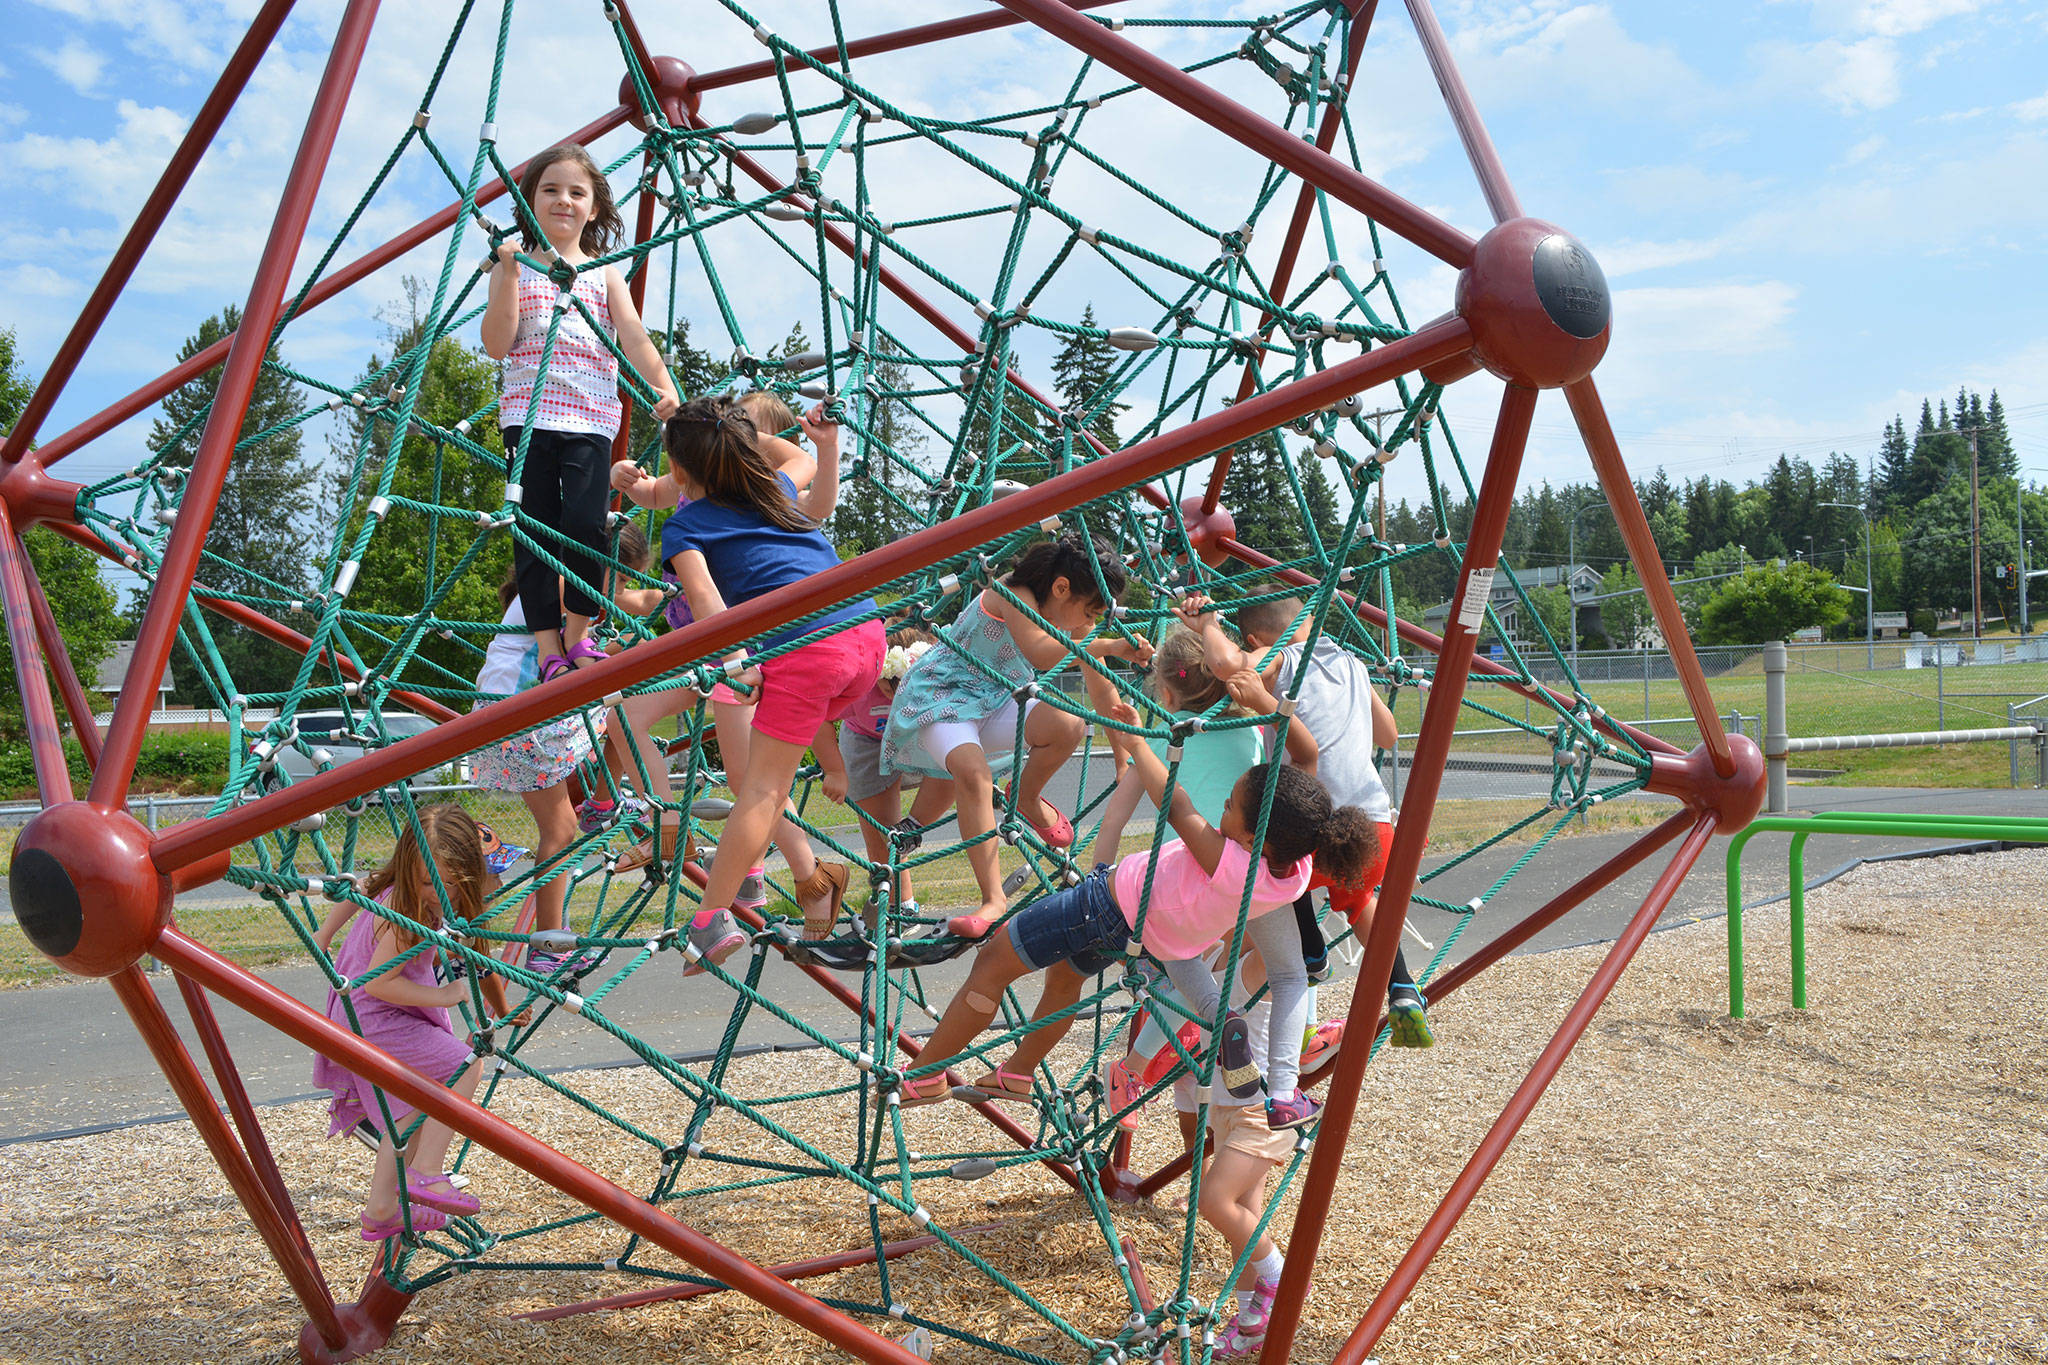 Schools out for summer: Check out camp offerings